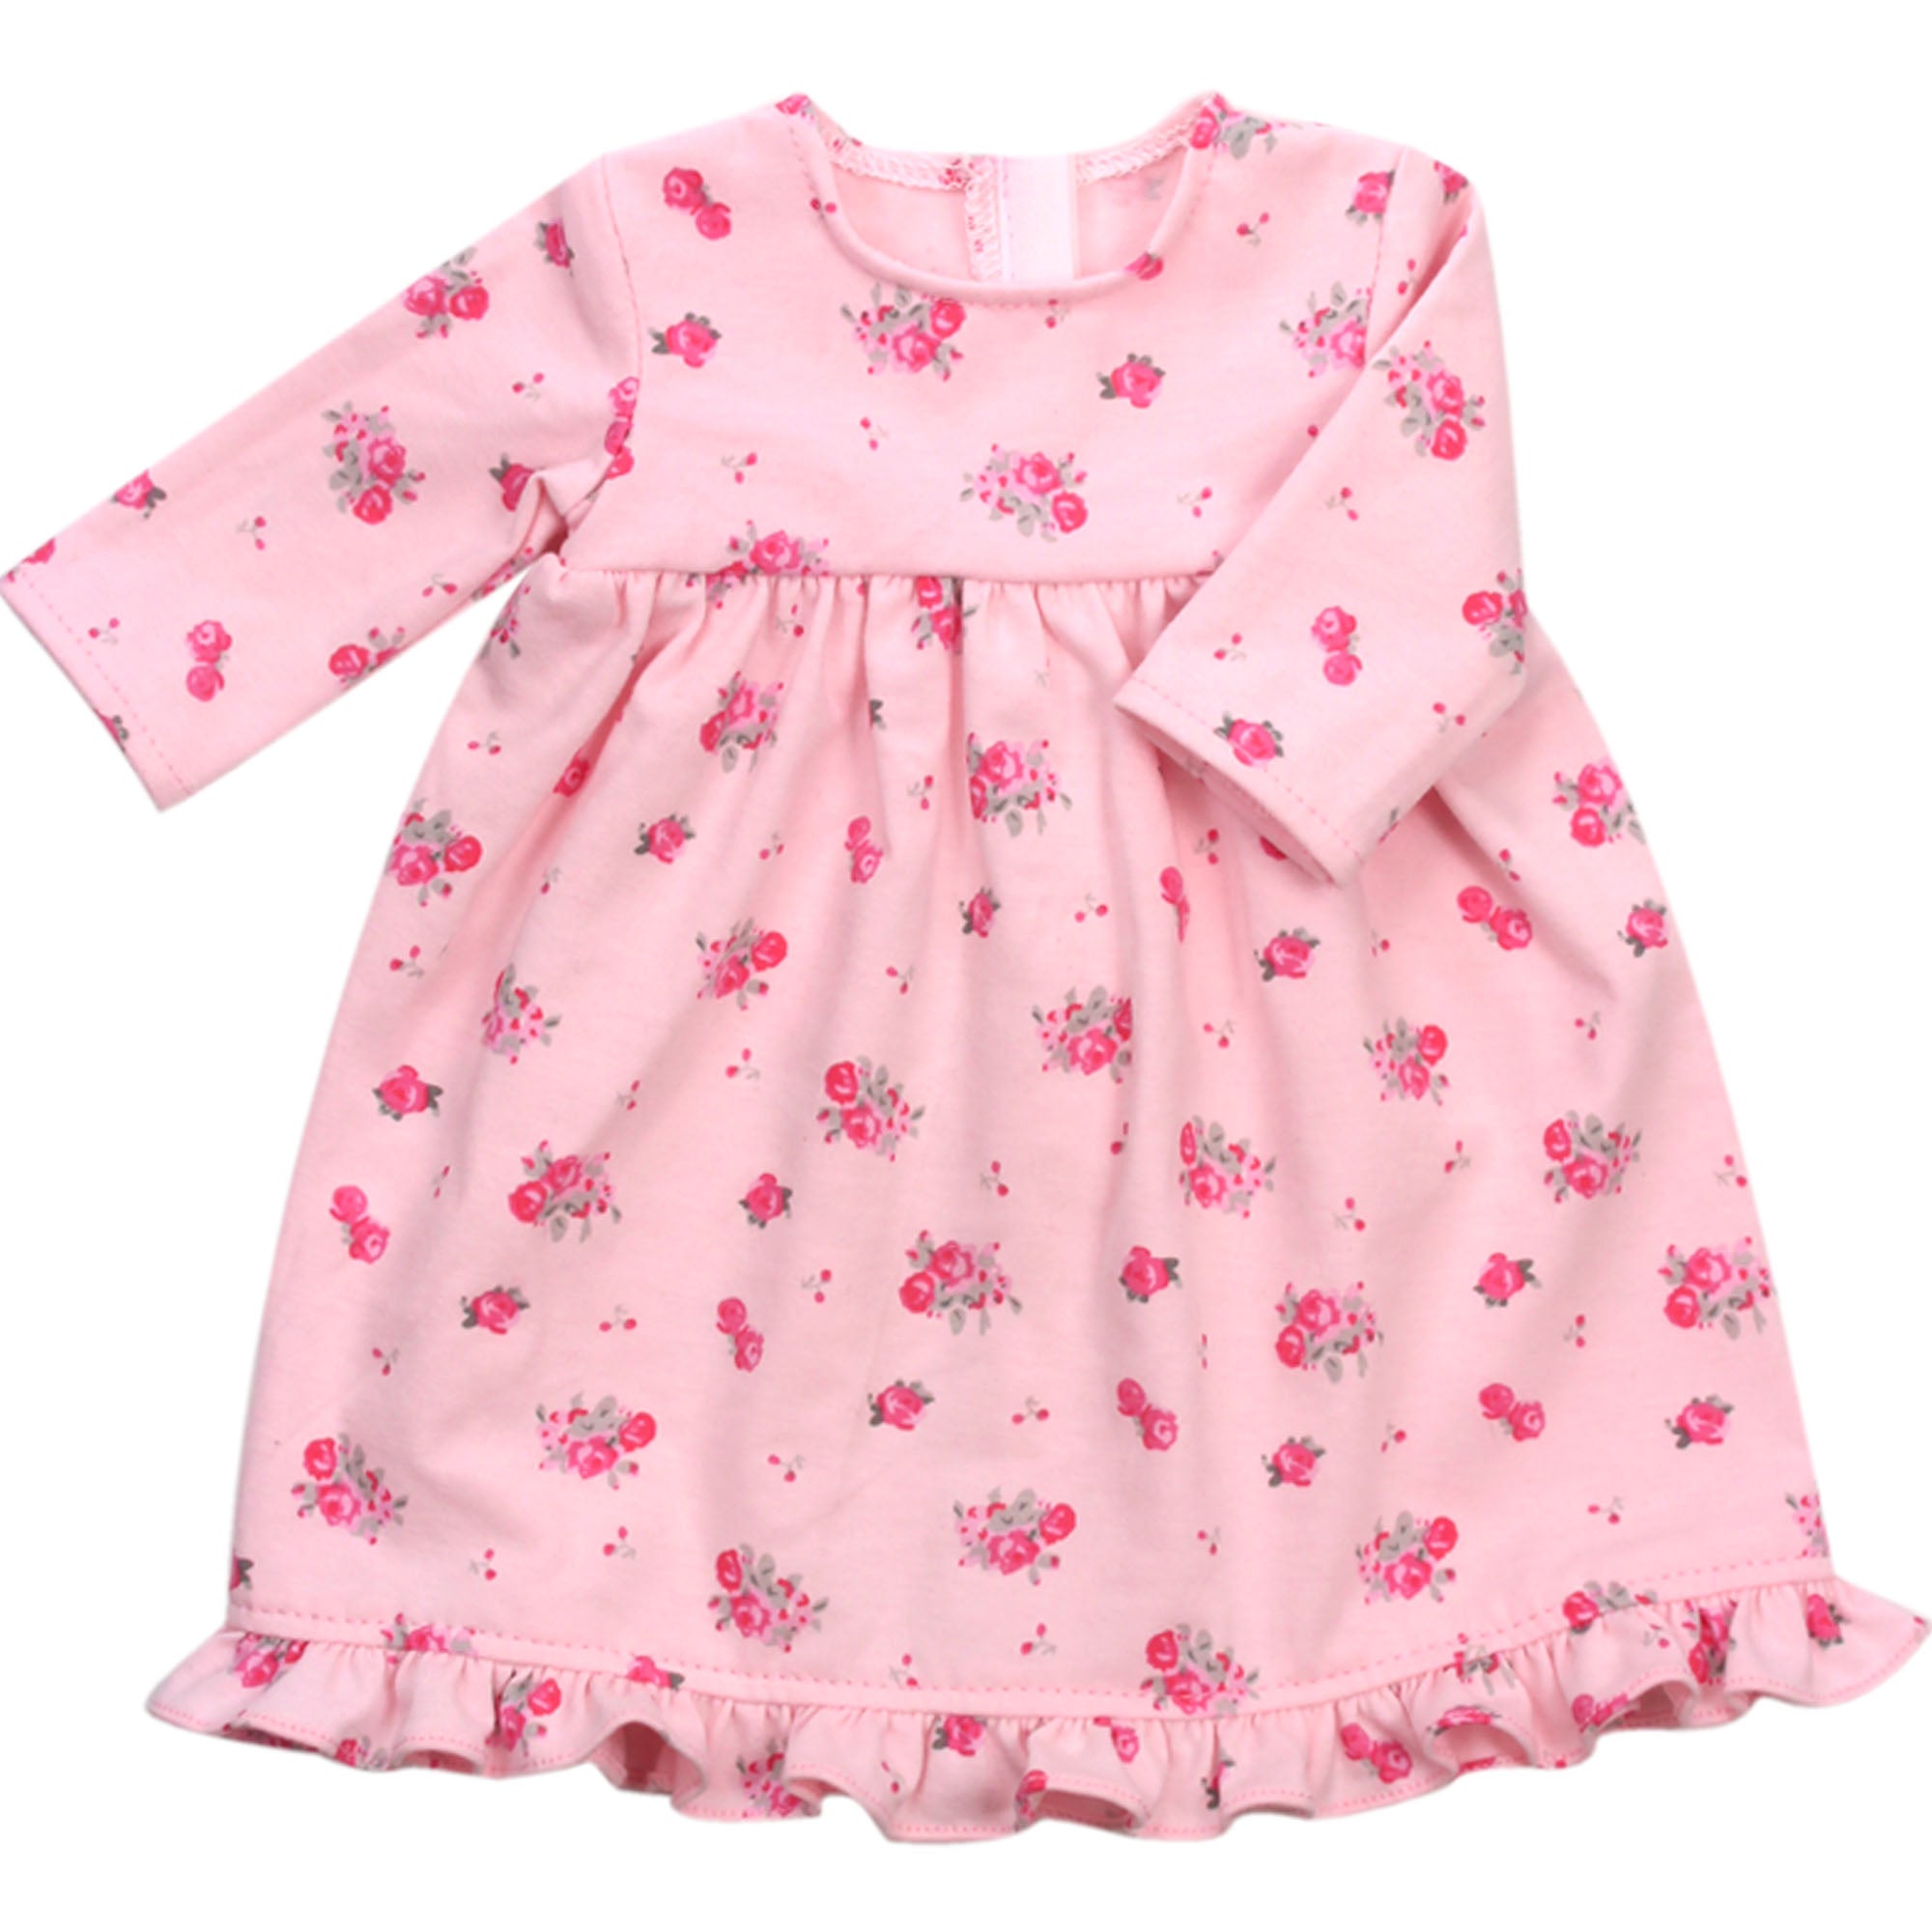 Sophia's Floral Print Nightgown for 18" Dolls, Pink